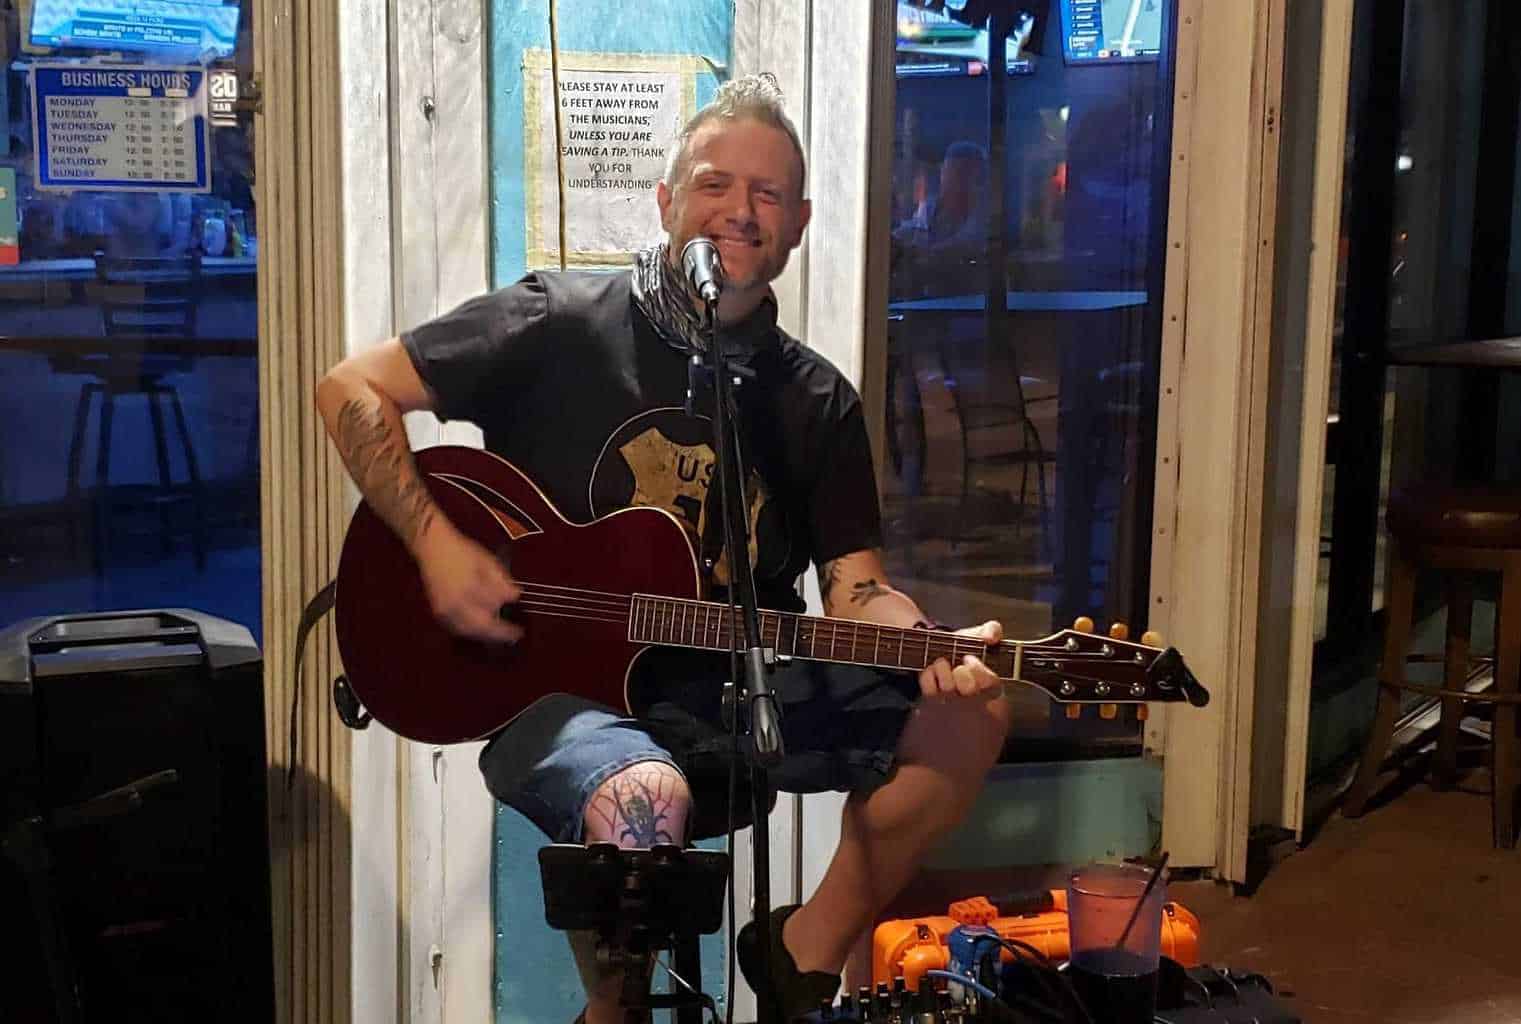 Lane Braden at the Blue Pointe Bar and Grill